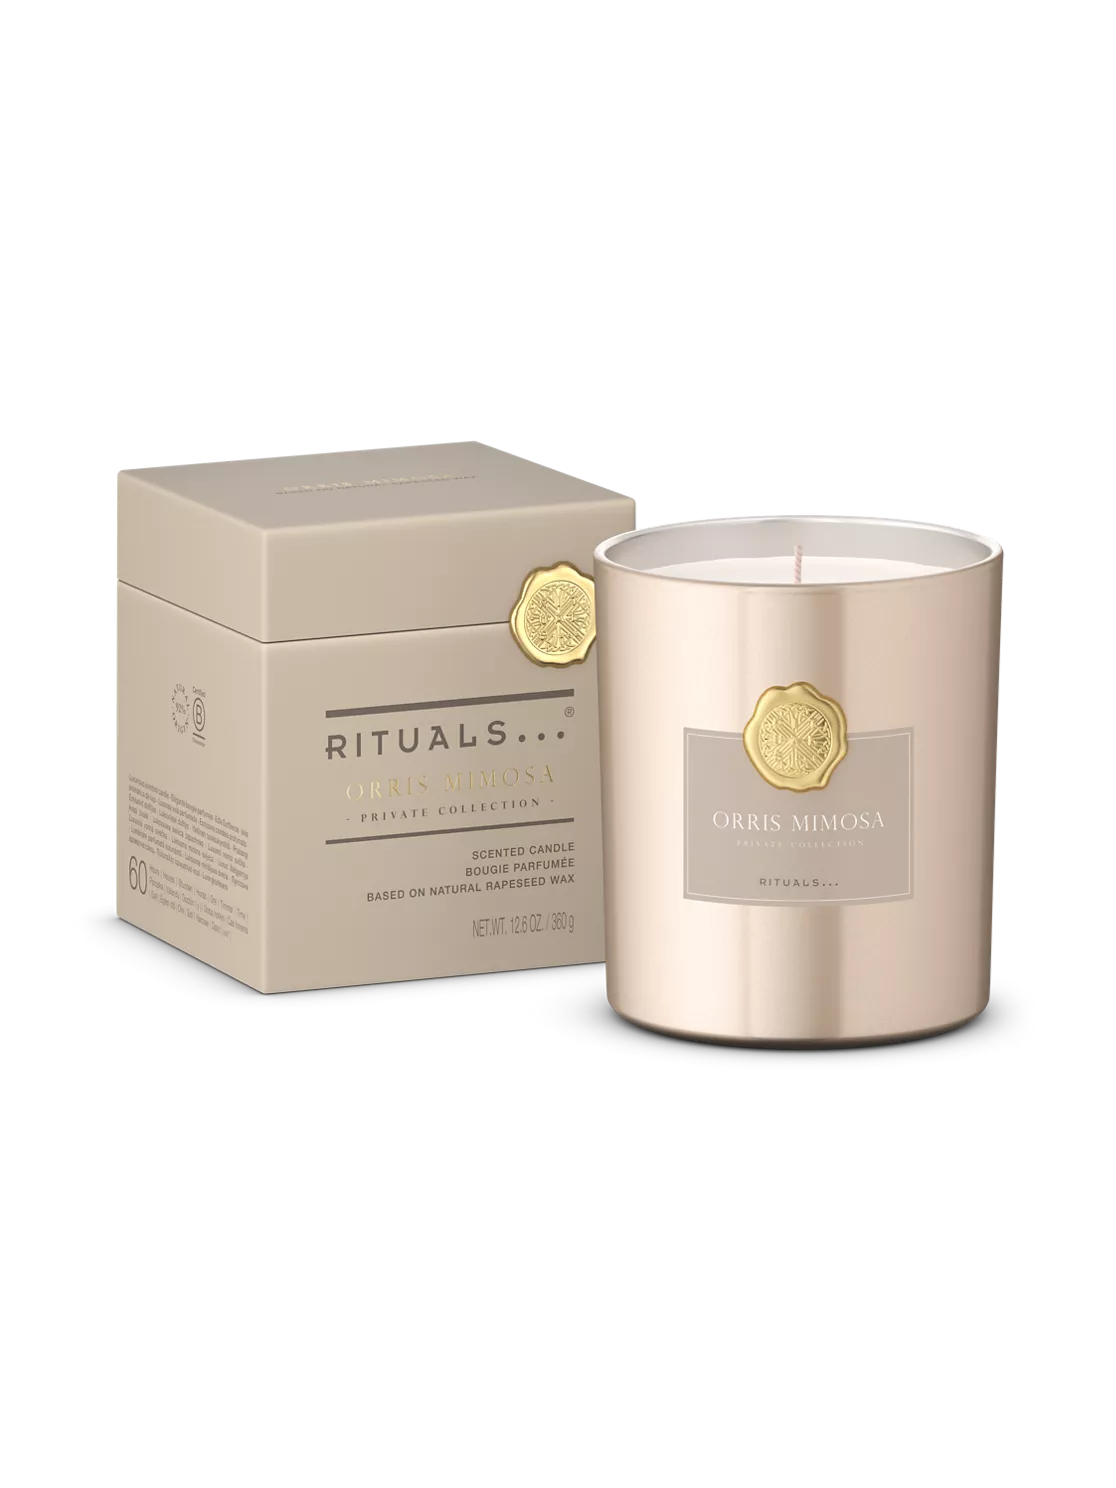 https://rituals.scene7.com/is/image/rituals/1116166-rituals-orris-mimosa-scentedcandle-360g-pack-closed:3-by-4?fmt=webp-alpha&hei=1488&resMode=sharp2&wid=1116